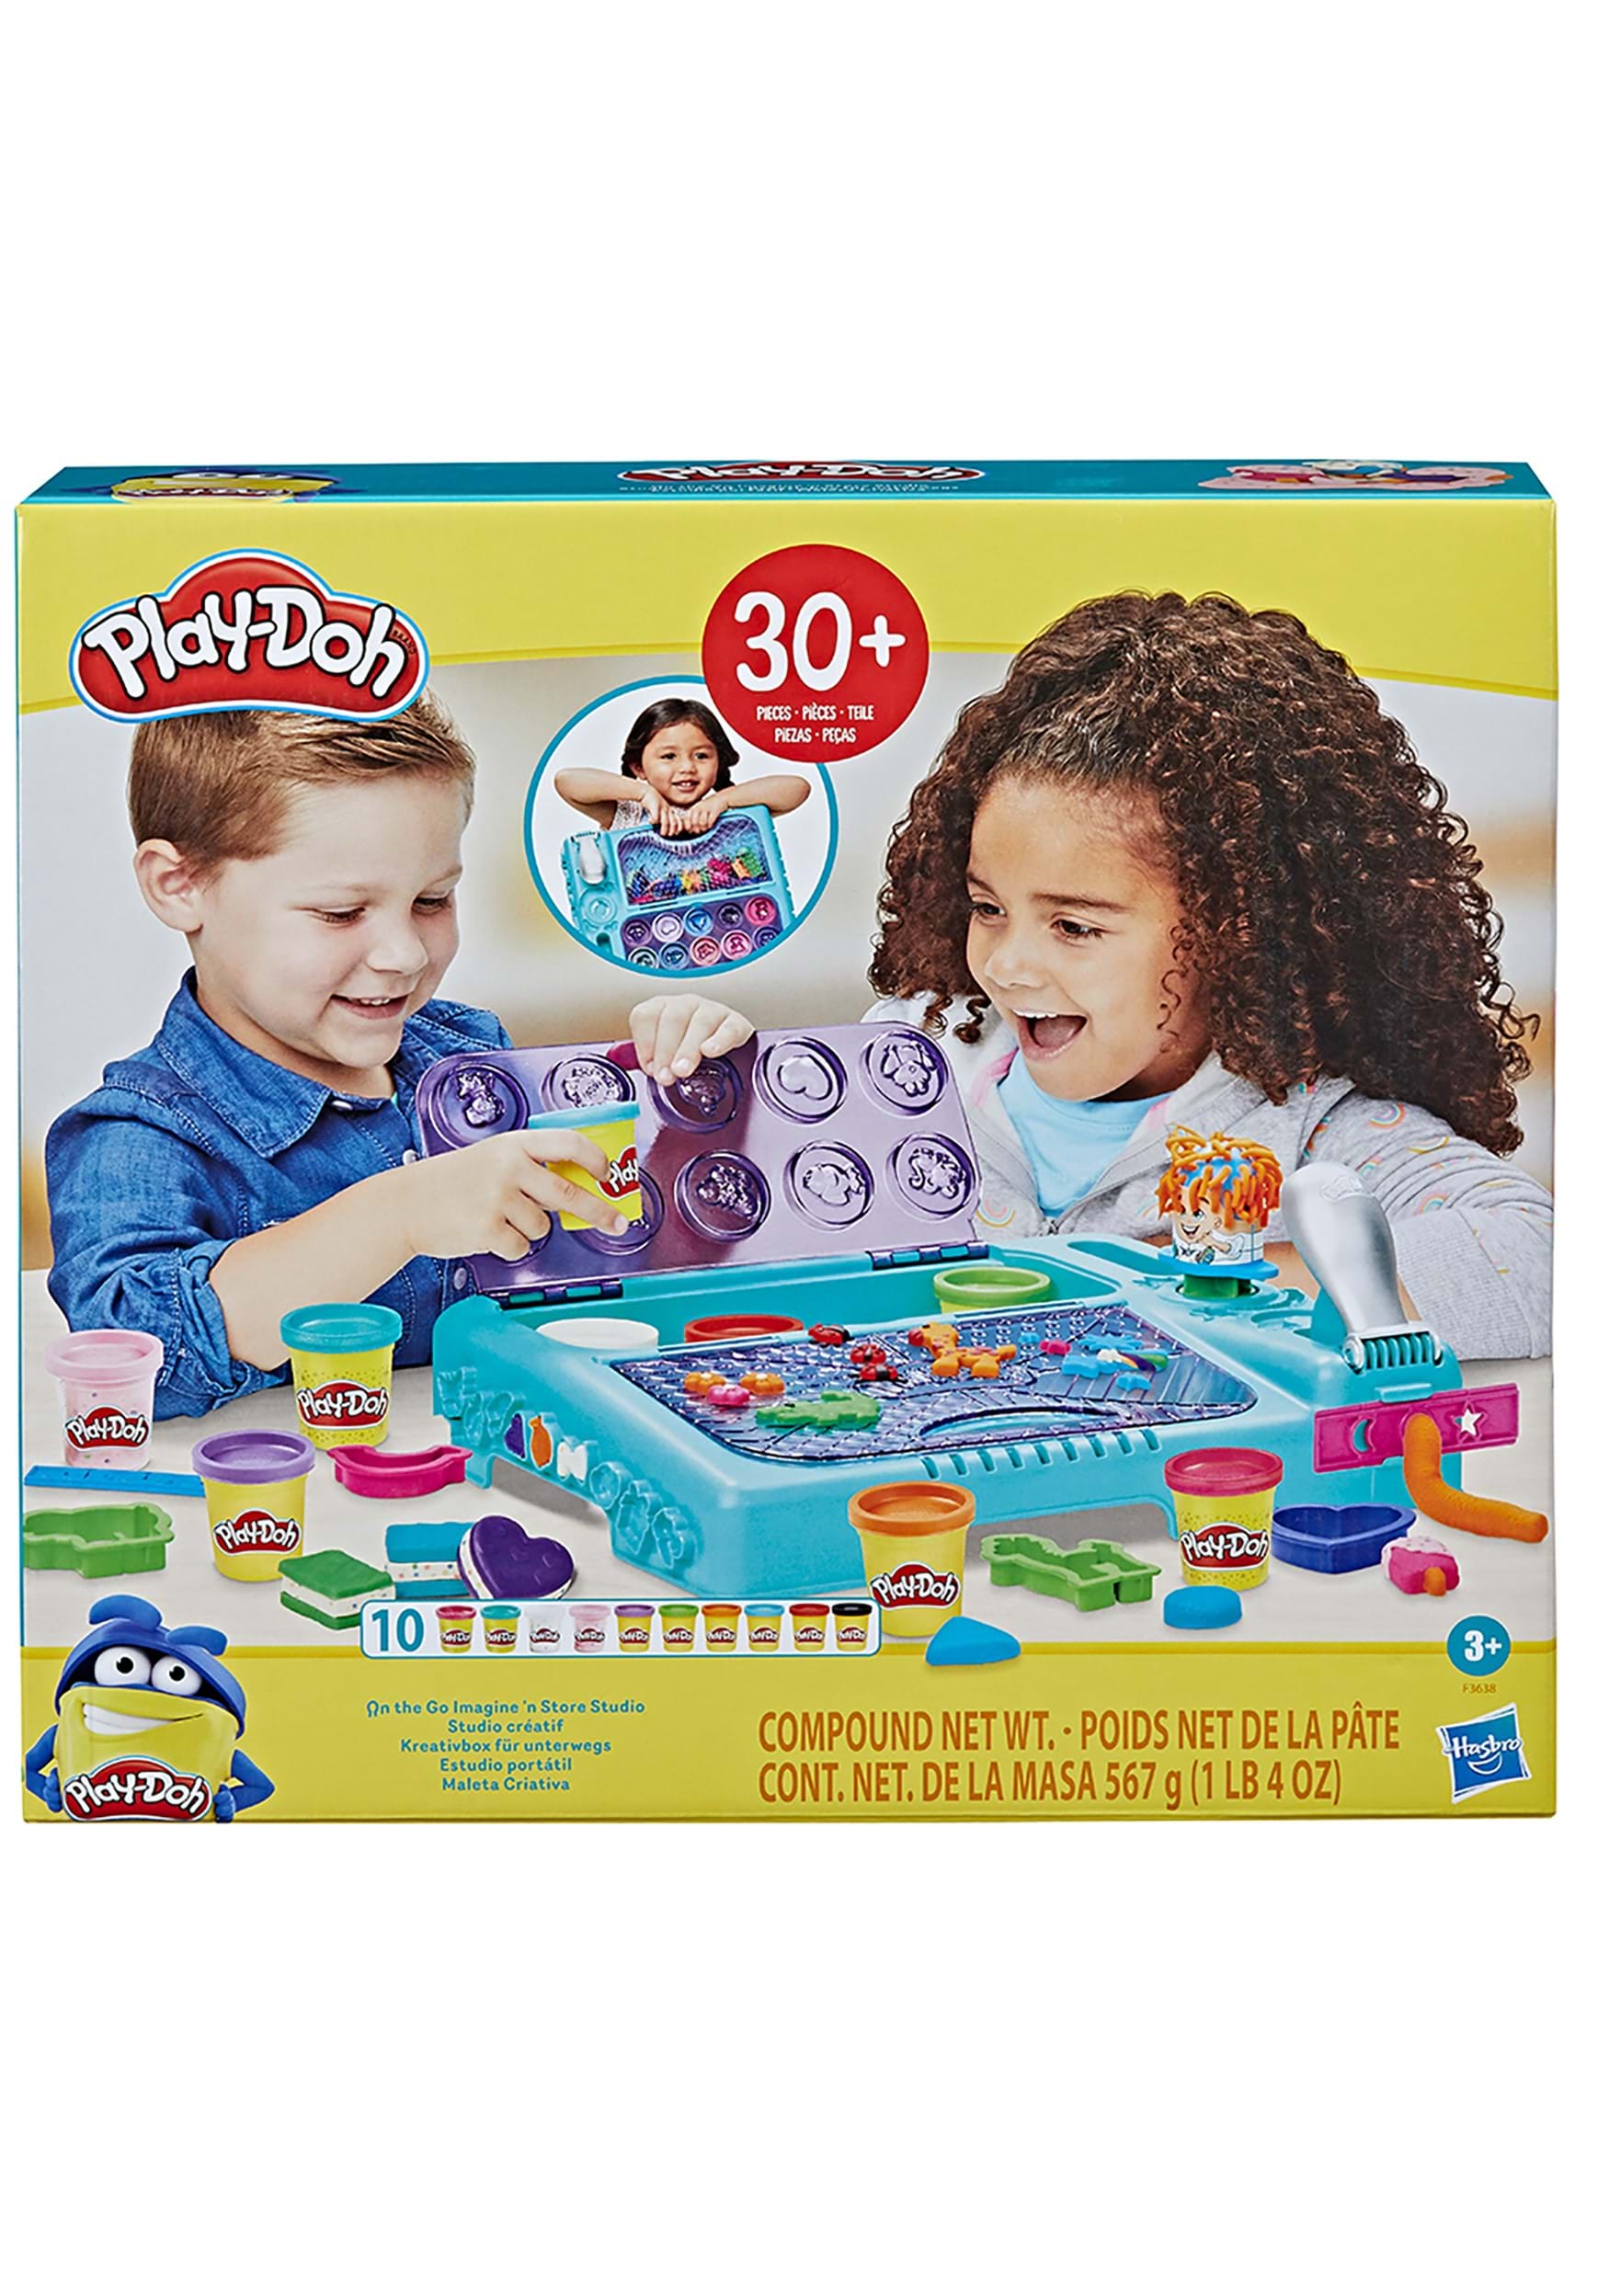 On-The-Go Drawing Kit - PLAYNOW! Toys and Games